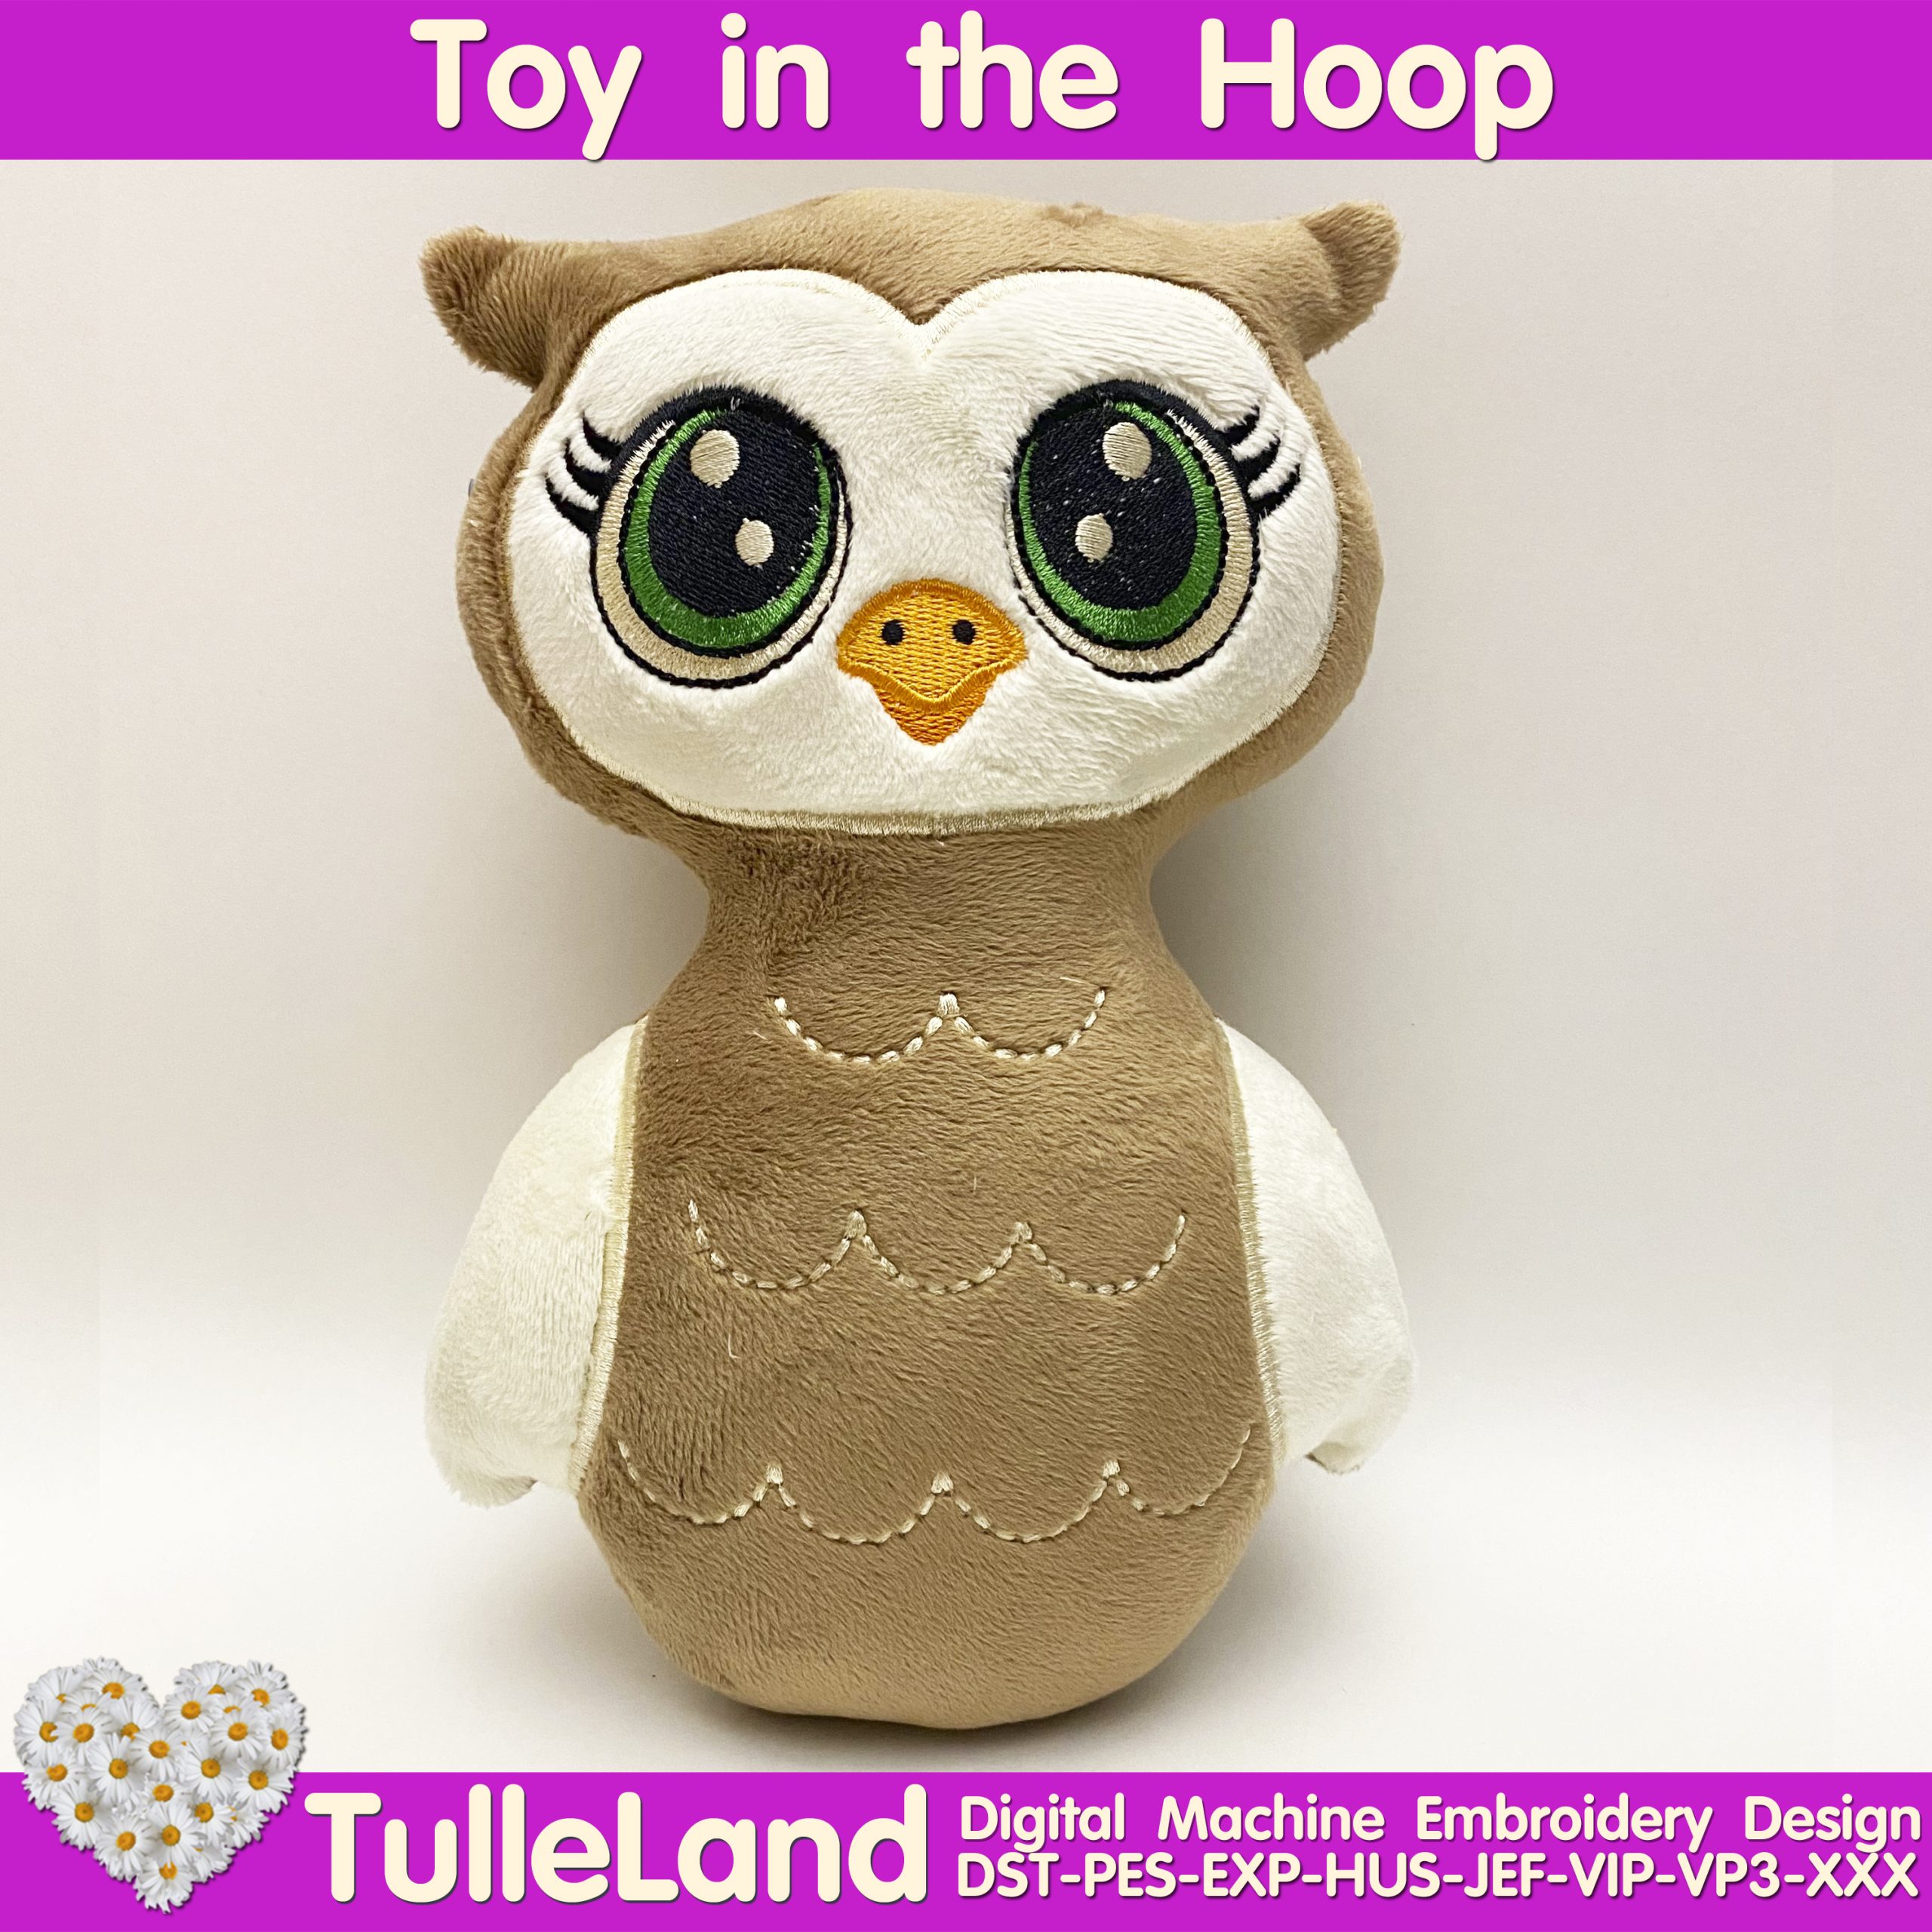 Owl Stuffed Toy Ith Pattern In The Hoop